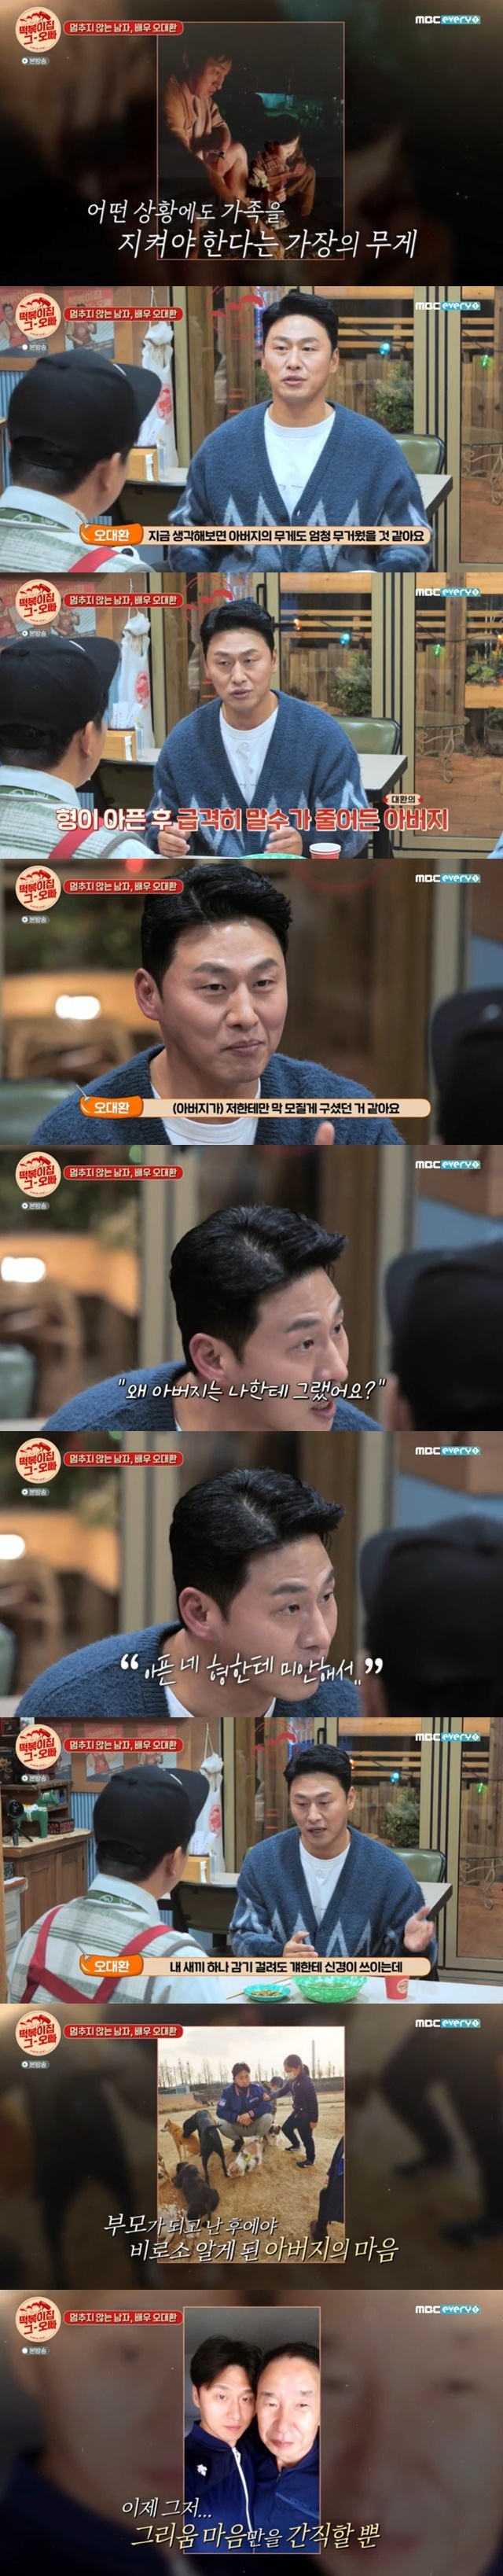 Oh Dae-hwan, as a father who raises a child, said that he understands the pain of his father in the past.Actor Oh Dae-hwan appeared in MBC Everlons Teokbokki house brother broadcast on March 8.On the same day, Oh Dae-hwan said in a slump, As the drama 38 Scake Team went well and I was highlighted, I received a lot of scripts for the first time without seeing Audie.I said I would do everything in my gratitude, so I did 10 works in 2010 and I shot all three broadcasts a day.I was shooting in Busan and moving to the Incheon set when a traffic accident occurred once, and my car exploded and I was in a four-car crash, he said in 2010.Oh Dae-hwan said, I took a CT and there was no major problem. I had a close examination the next day.I had to rest, but there was another work. Unknown. Its hard to climb. Unsettled anxiety. Who pays you to play?I had four children. It was a right word and Fathers weight.Oh Dae-hwan said, I think my fathers weight would have been heavy. My brother is sick. So my father was passive when he found out he was sick.I was a little bit too bloated, so he just got me. I was sick. I was a grown man.Why didnt he play with me so much, just kicking me every day?I didnt have a word of warmness or skinnyness, said Oh. But there was a picture of Father carrying me.It was full of complaints.Im sorry for your brother because my child is so pretty and Im asking why he did it, so I guess he did it from that time. He said that his father, who had been suffering from his disability, understood.Oh Dae-hwan said, I only care about him even if I get a Flu.I think it would have been inevitable because there is a son with a disability, not Flu, but a sick child and a healthy child.He said he was sorry, he said, and he complained to his father and apologized for his sorryness.Oh Dae-hwans father died a few years ago. The first drama was in 2010, and then he got his first role, not a minor role.TV was a long-time CRT TV. Its a thin LED TV. Biggest 50 inches. I want to see your face.I am grateful and thankful, he said.